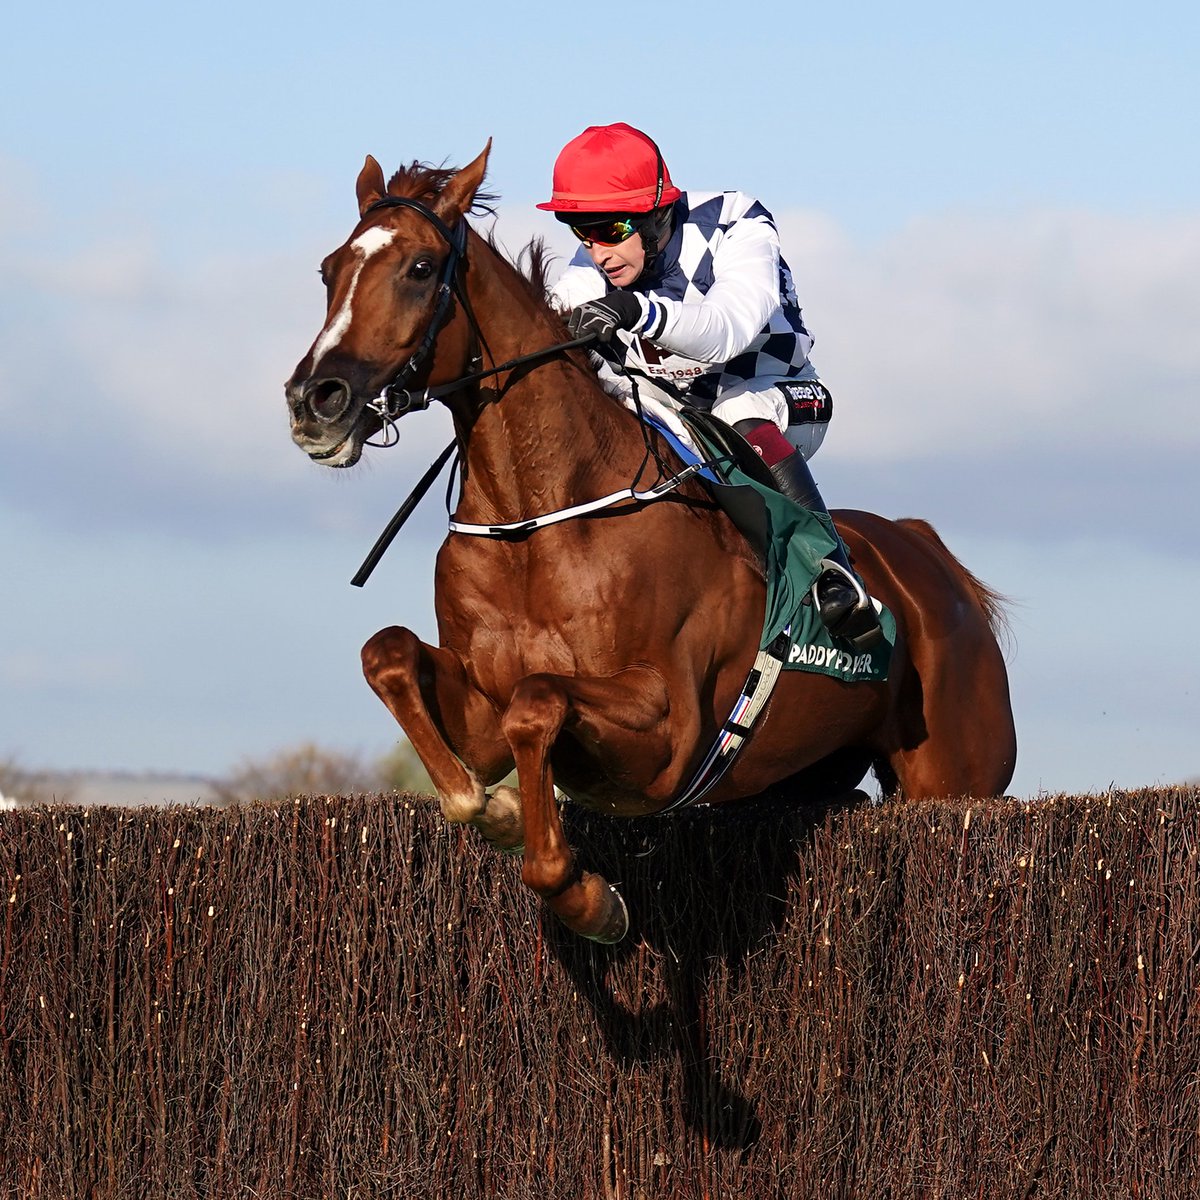 Banbridge breaks the heart of Captain Guinness in the William Hill Champion Chase at Punchestown!